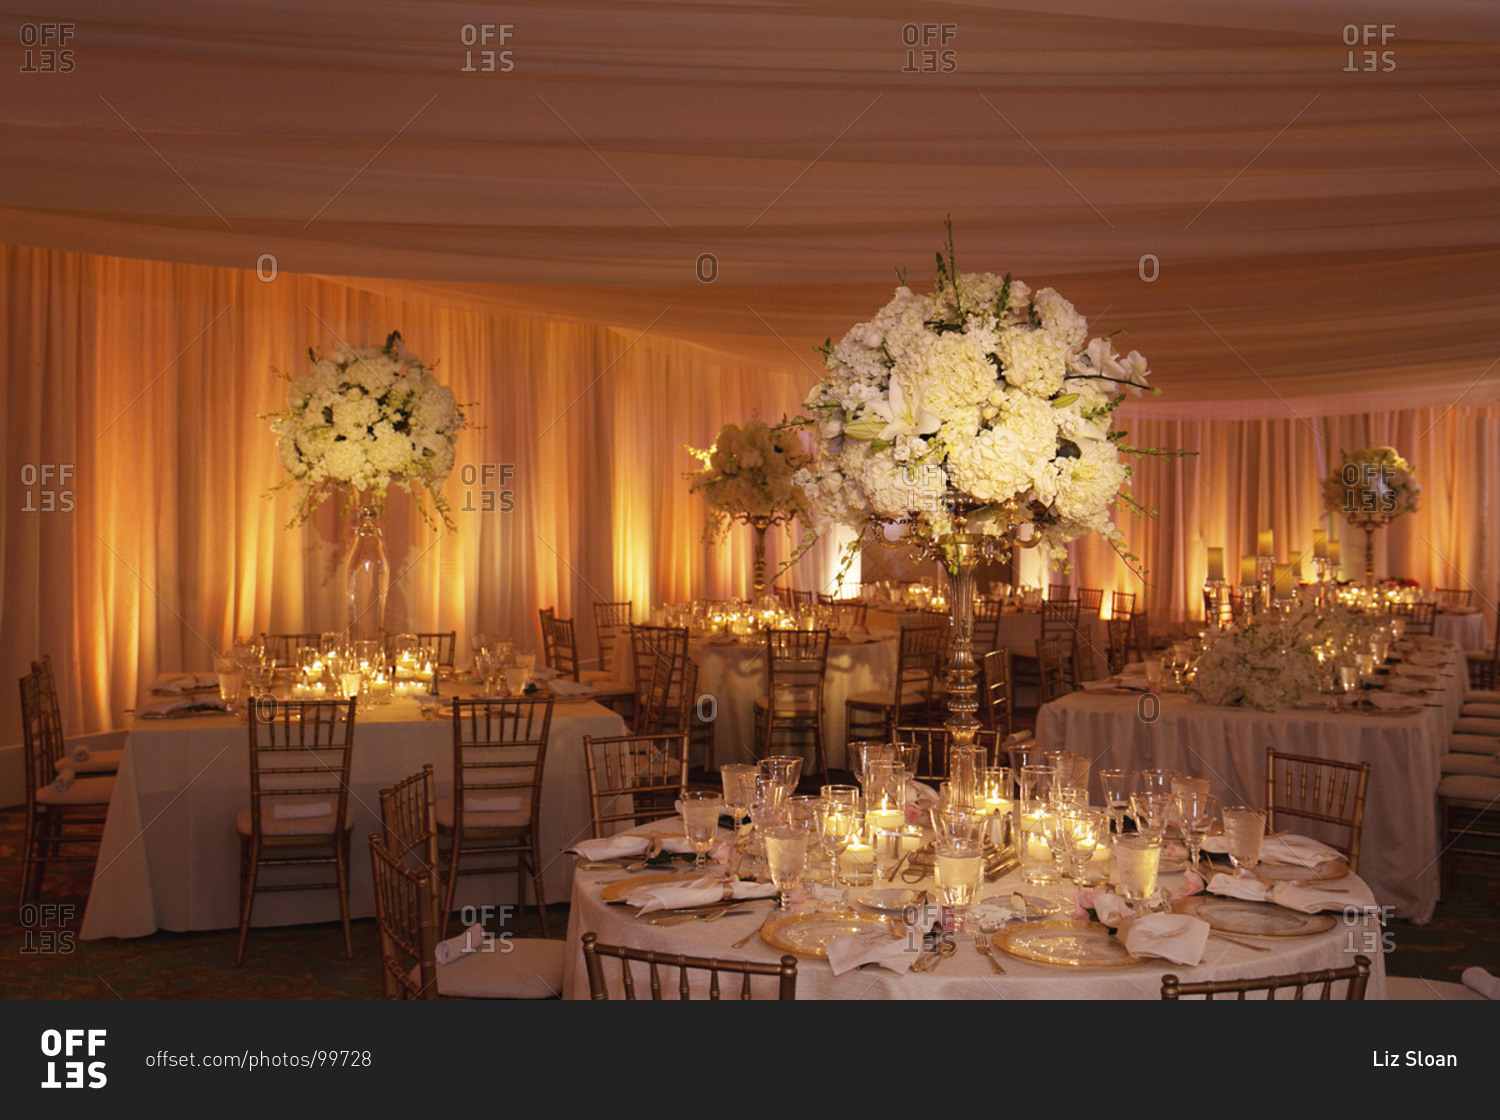 Banquet hall decorated for wedding